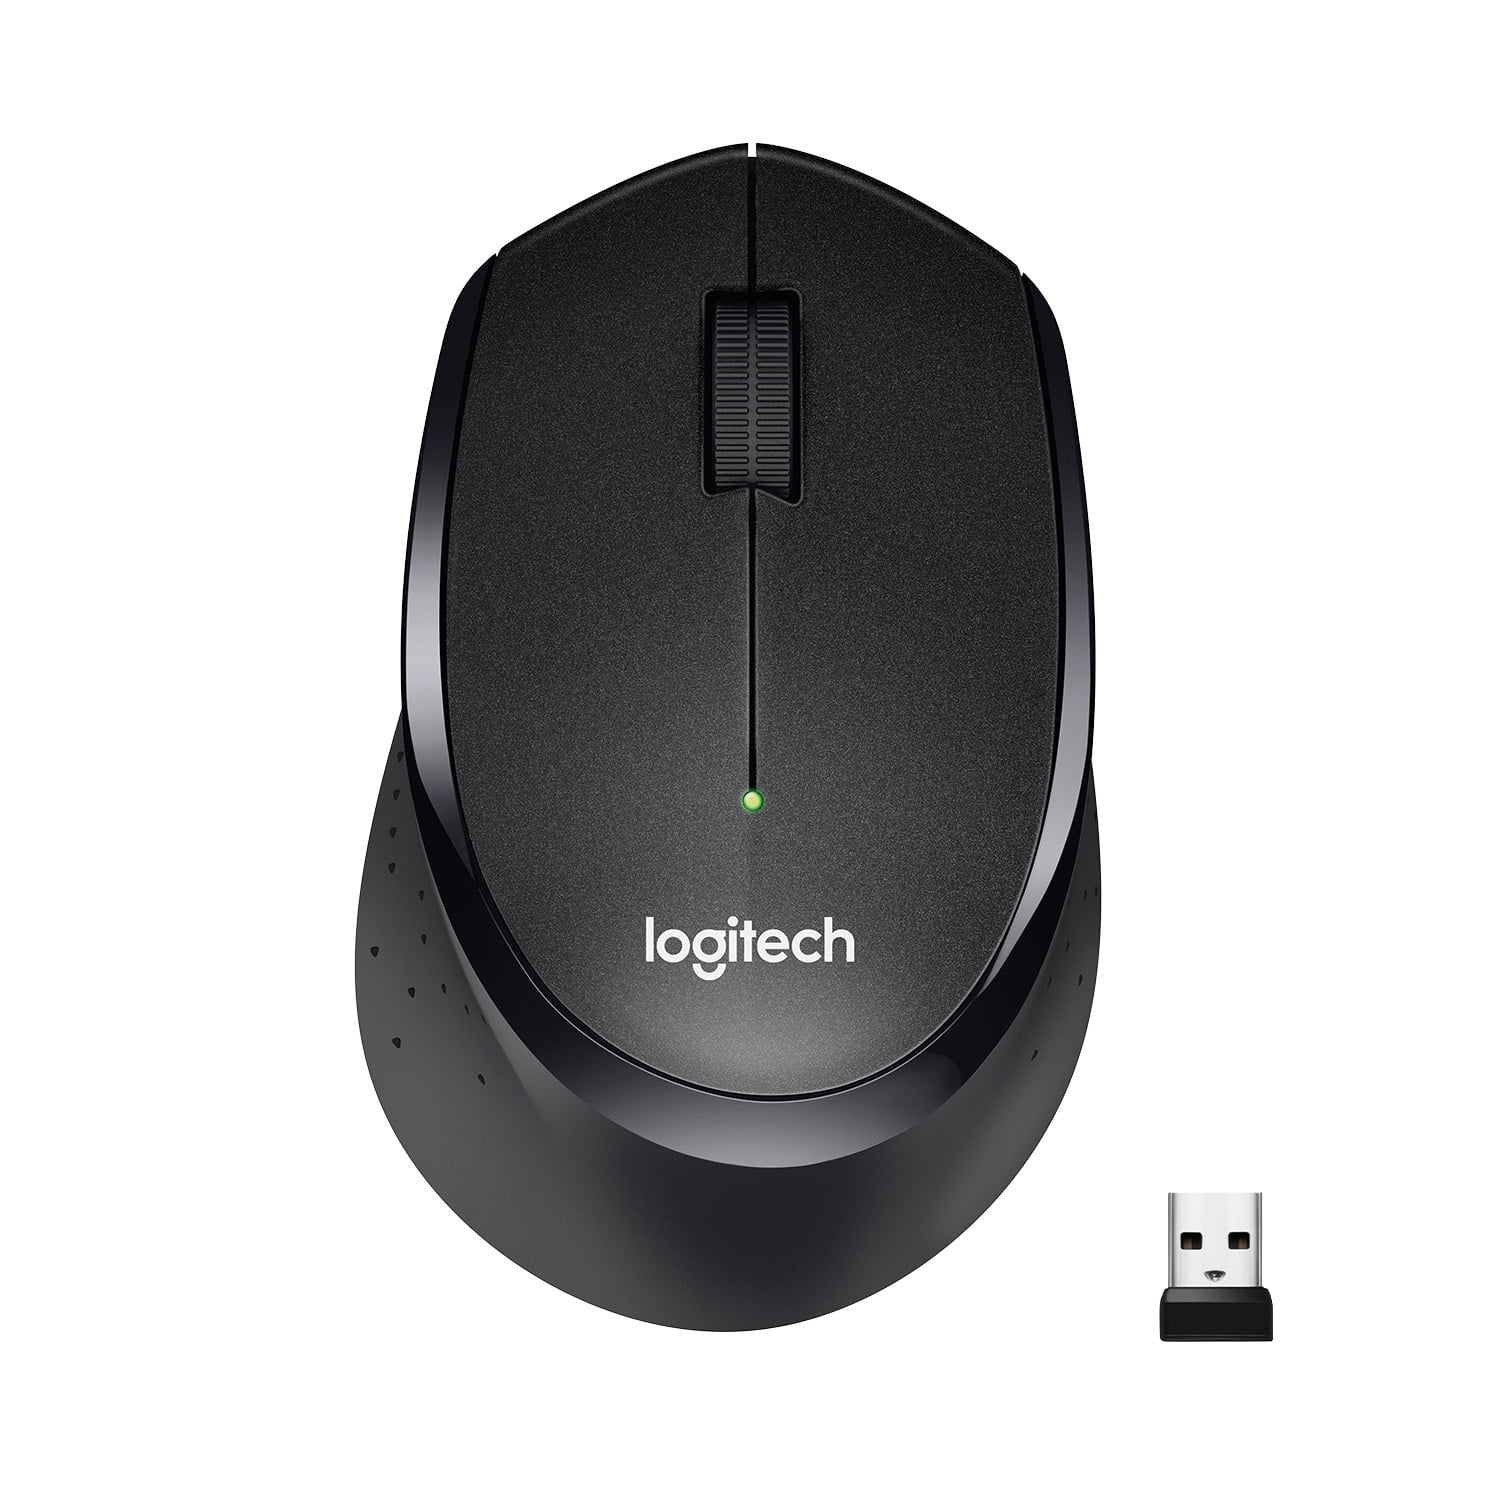 Logitech M330 Wireless Mouse, 2.4GHz with Nano Receiver, 1000 DPI Optical Tracking, 2-year Battery Life, Compatible with PC, Mac, Laptop, Chromebook, Black - Walmart.com